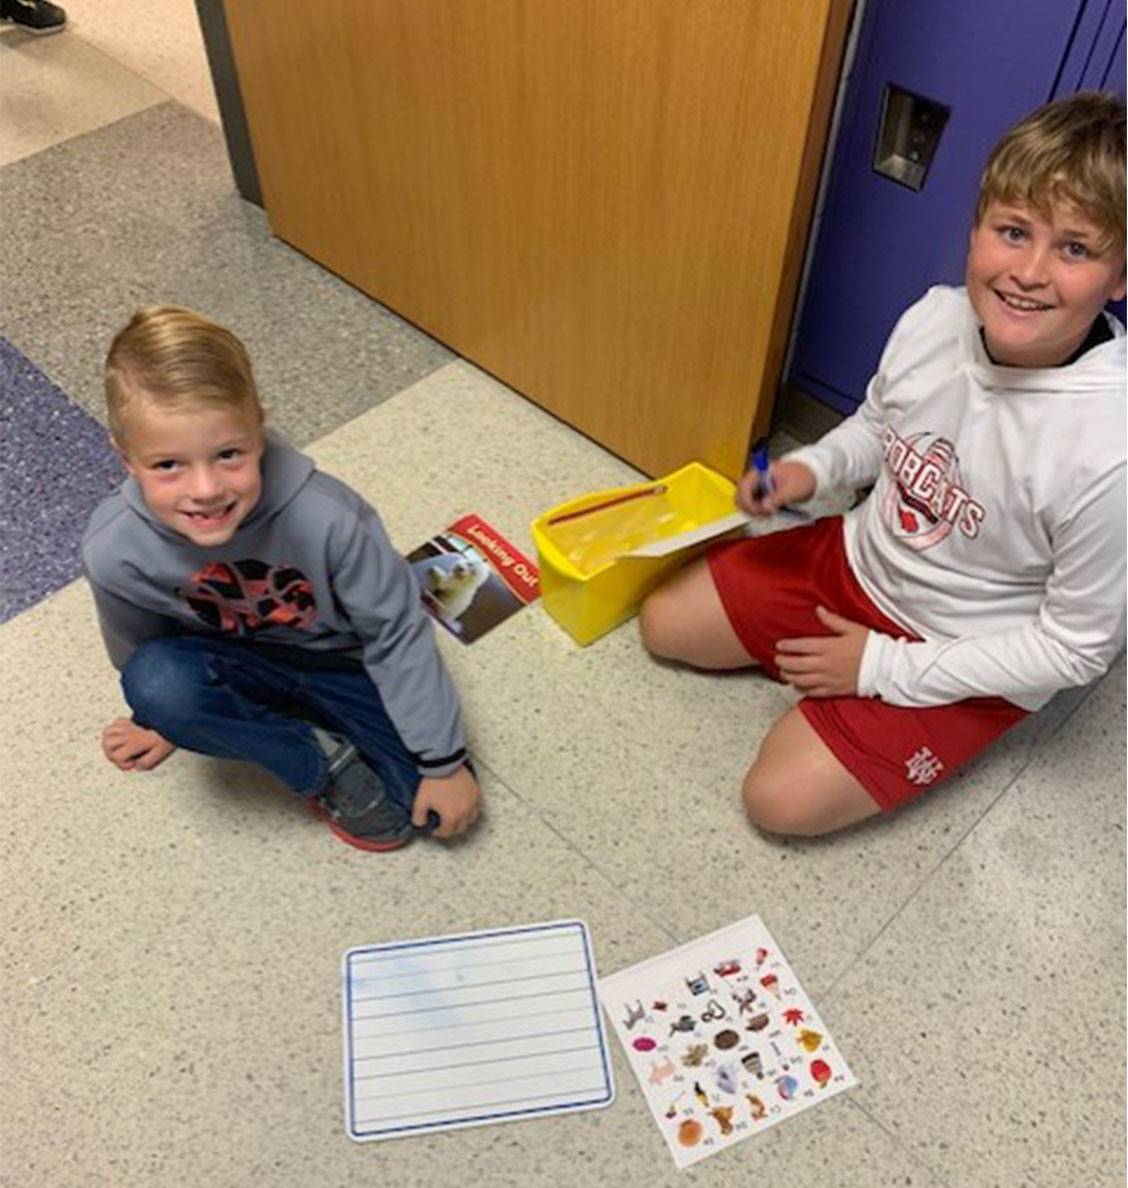 PES - 5th grade boy working with 1st grade boy during writing center in hallway